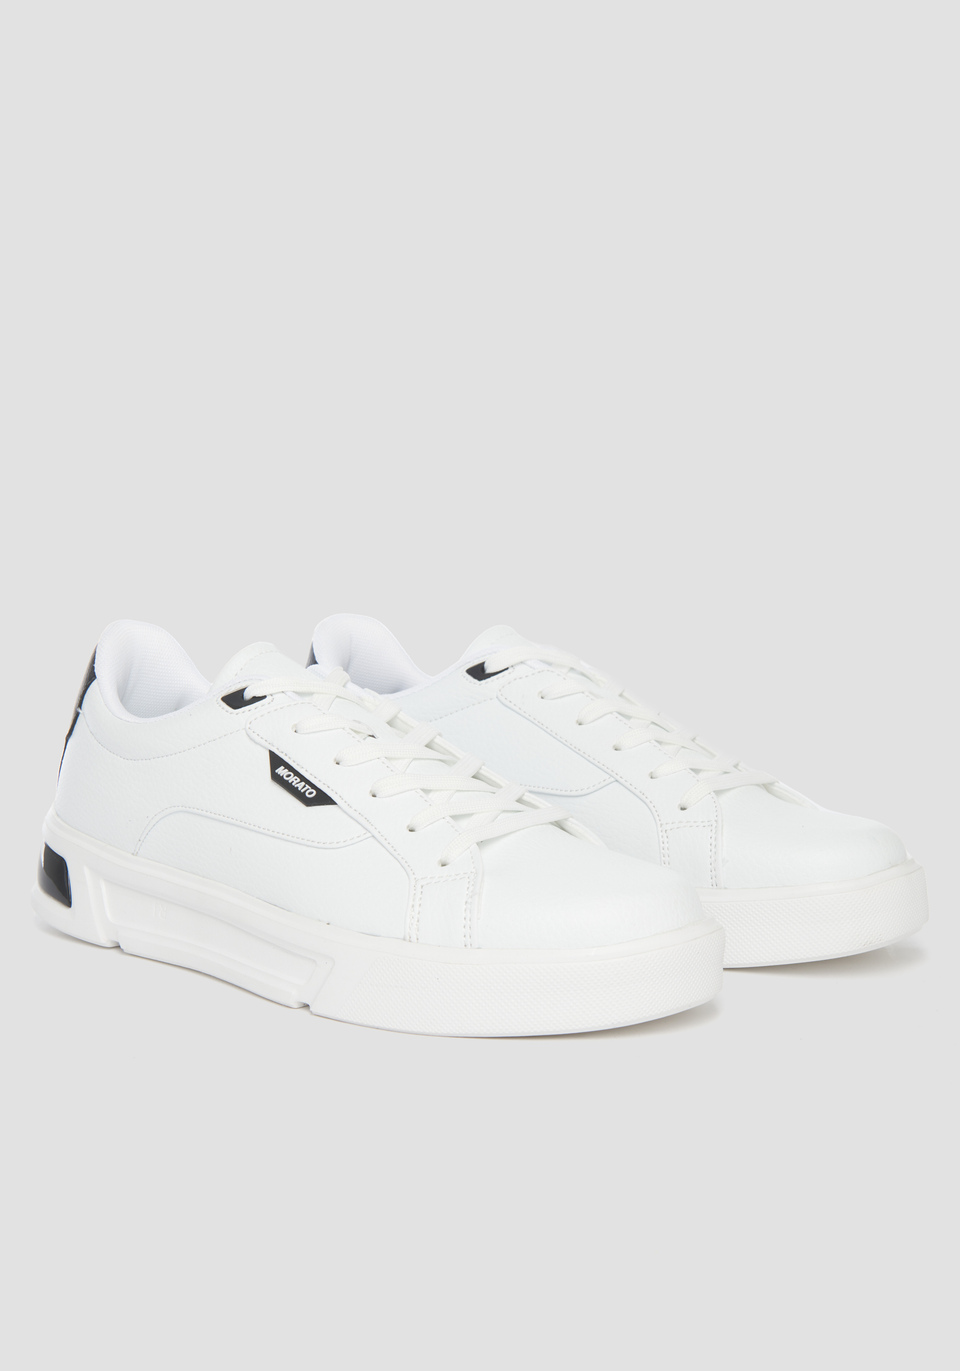 "STAGE" SNEAKERS IN FAUX LEATHER - Antony Morato Online Shop